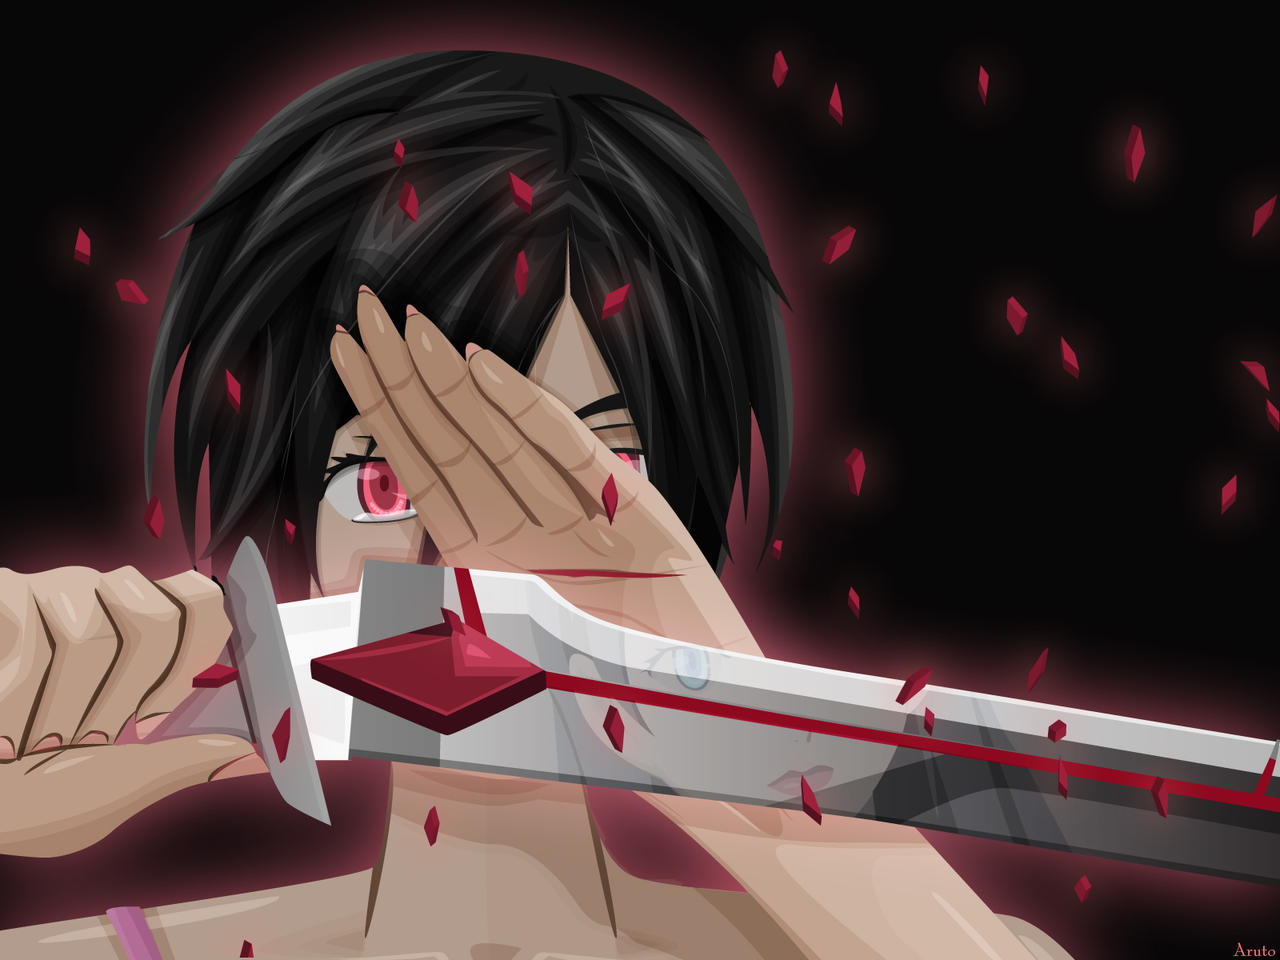 Blood_and_tears_by_Aruto.jpg